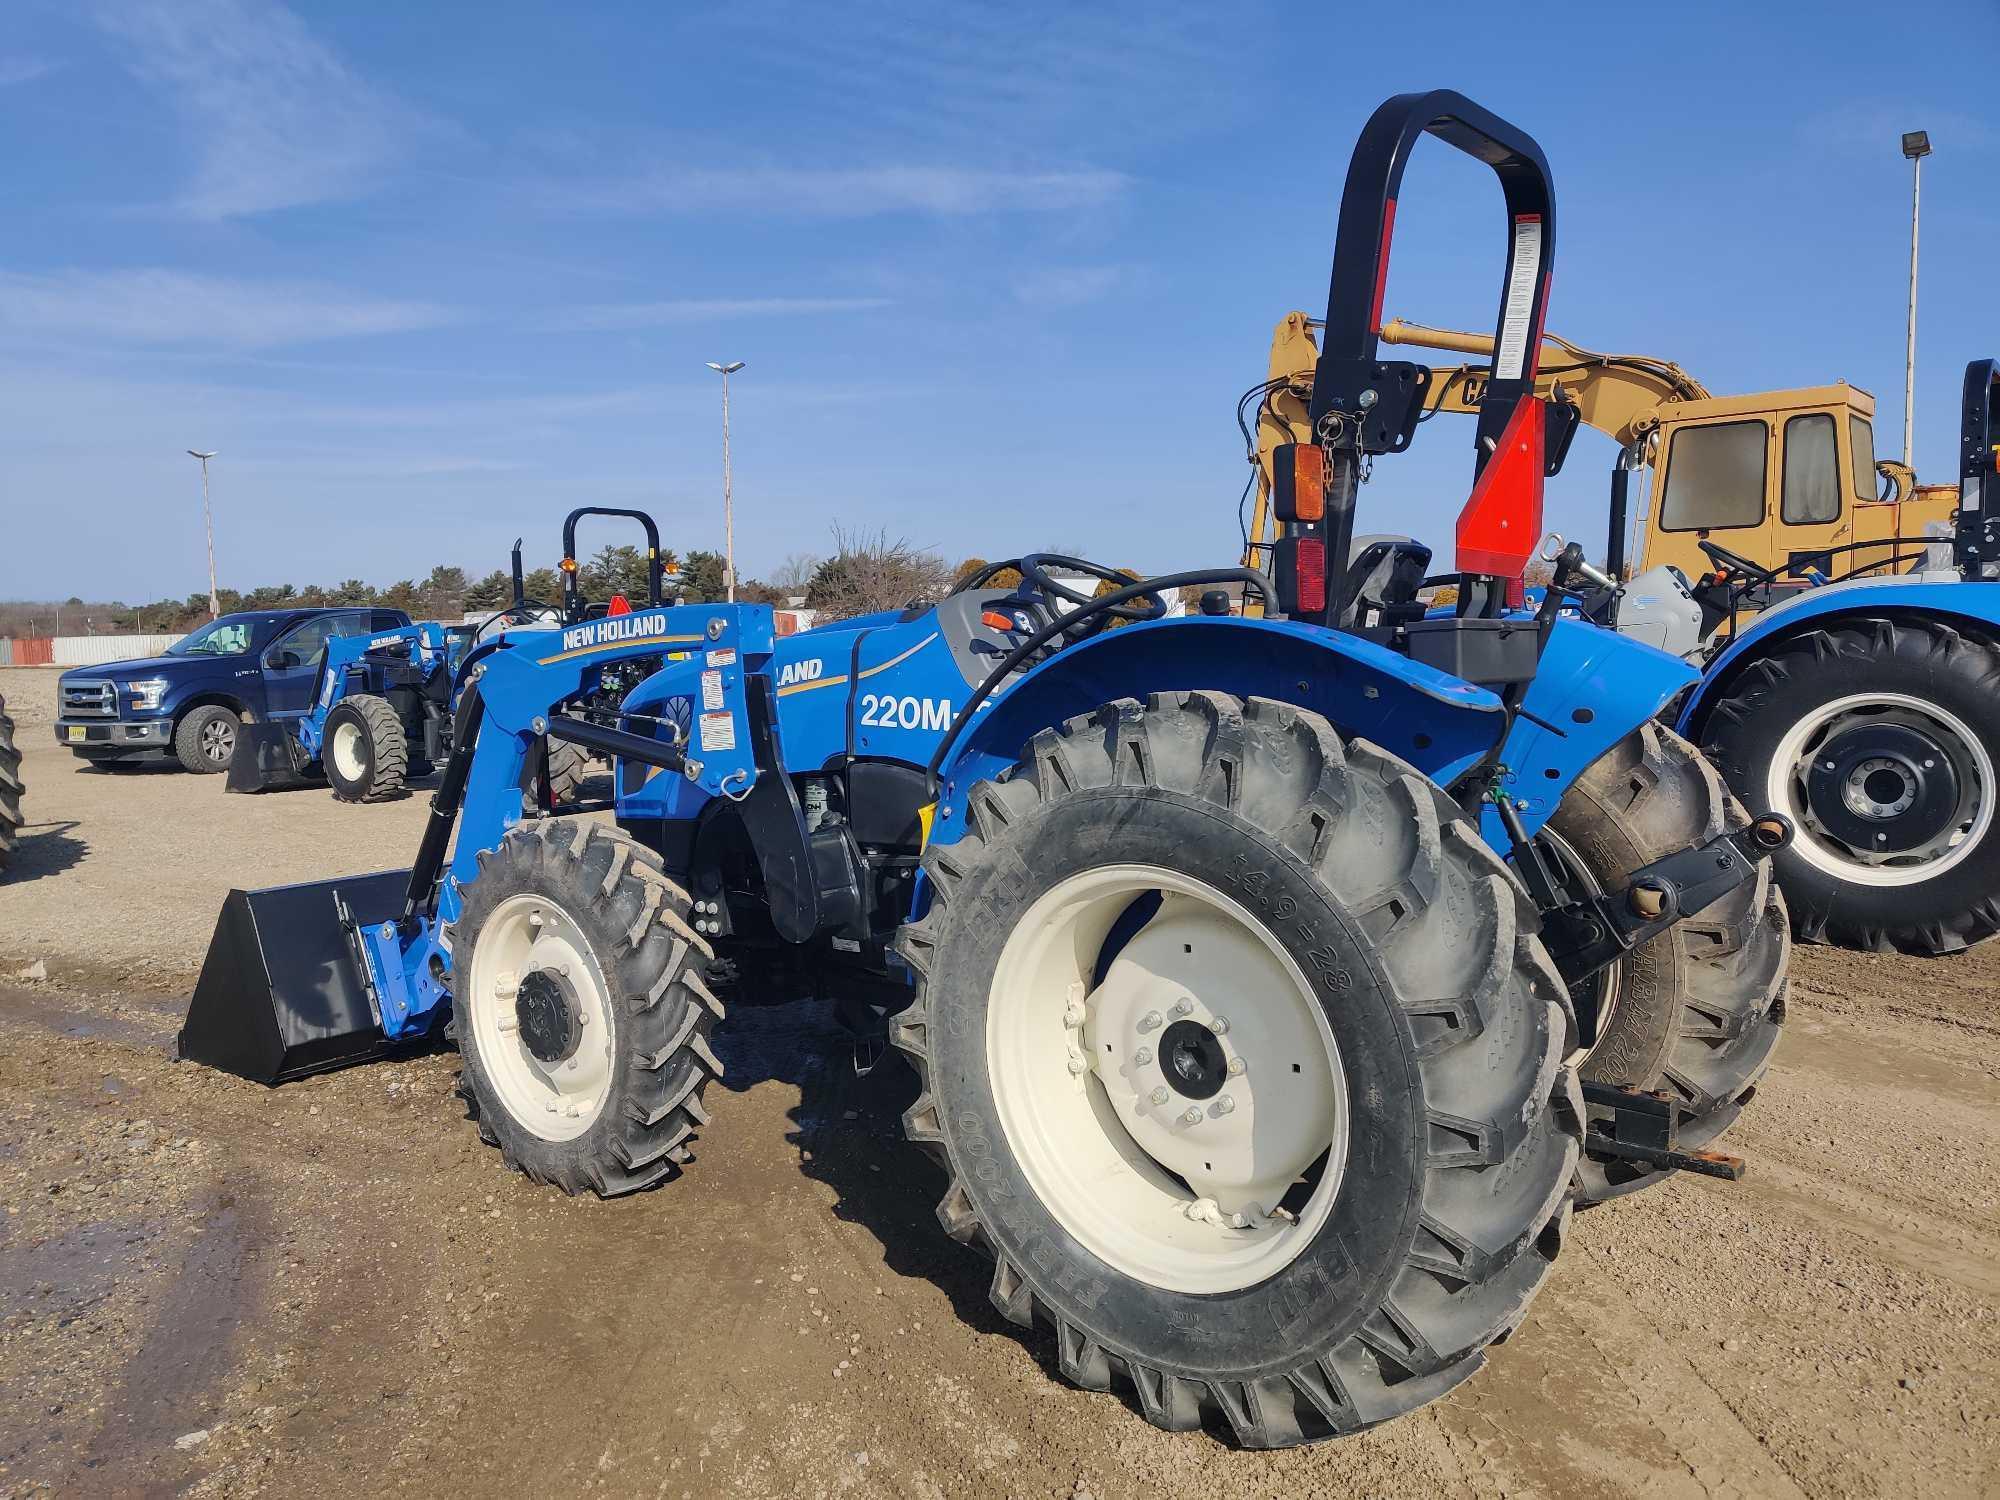 NEW NEW HOLLAND WORKMASTER 70 TRACTOR LOADER SN-5627180... 4x4, powered by diesel engine, 70hp,